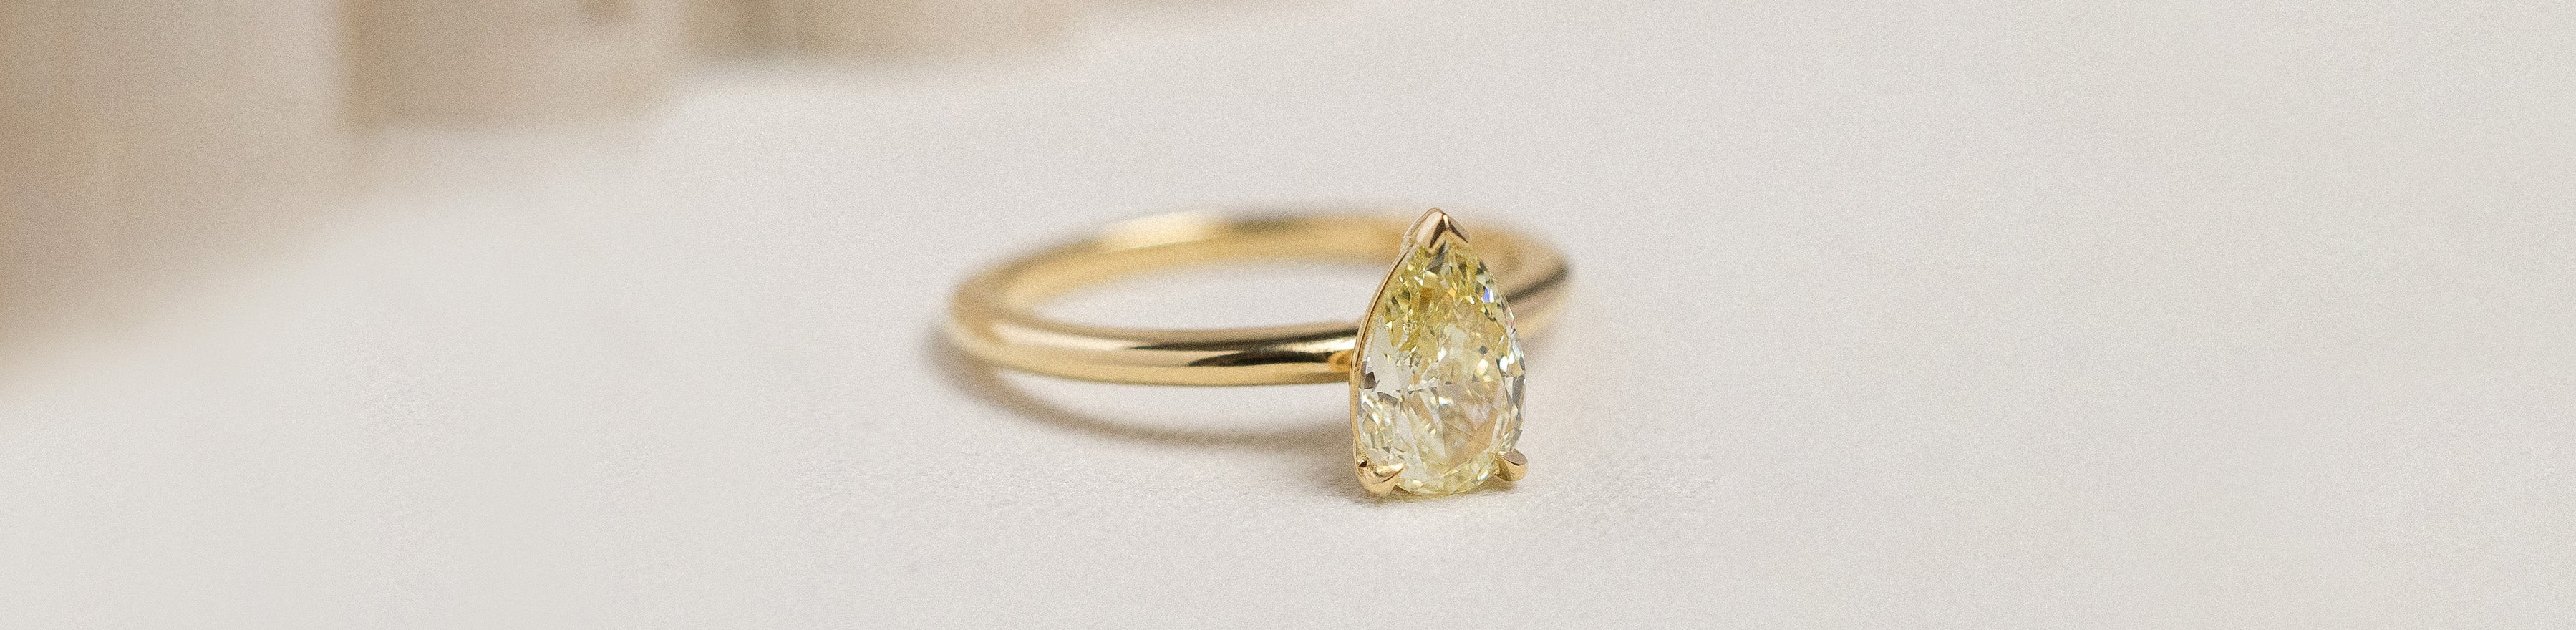 Engagement Ring: Pear